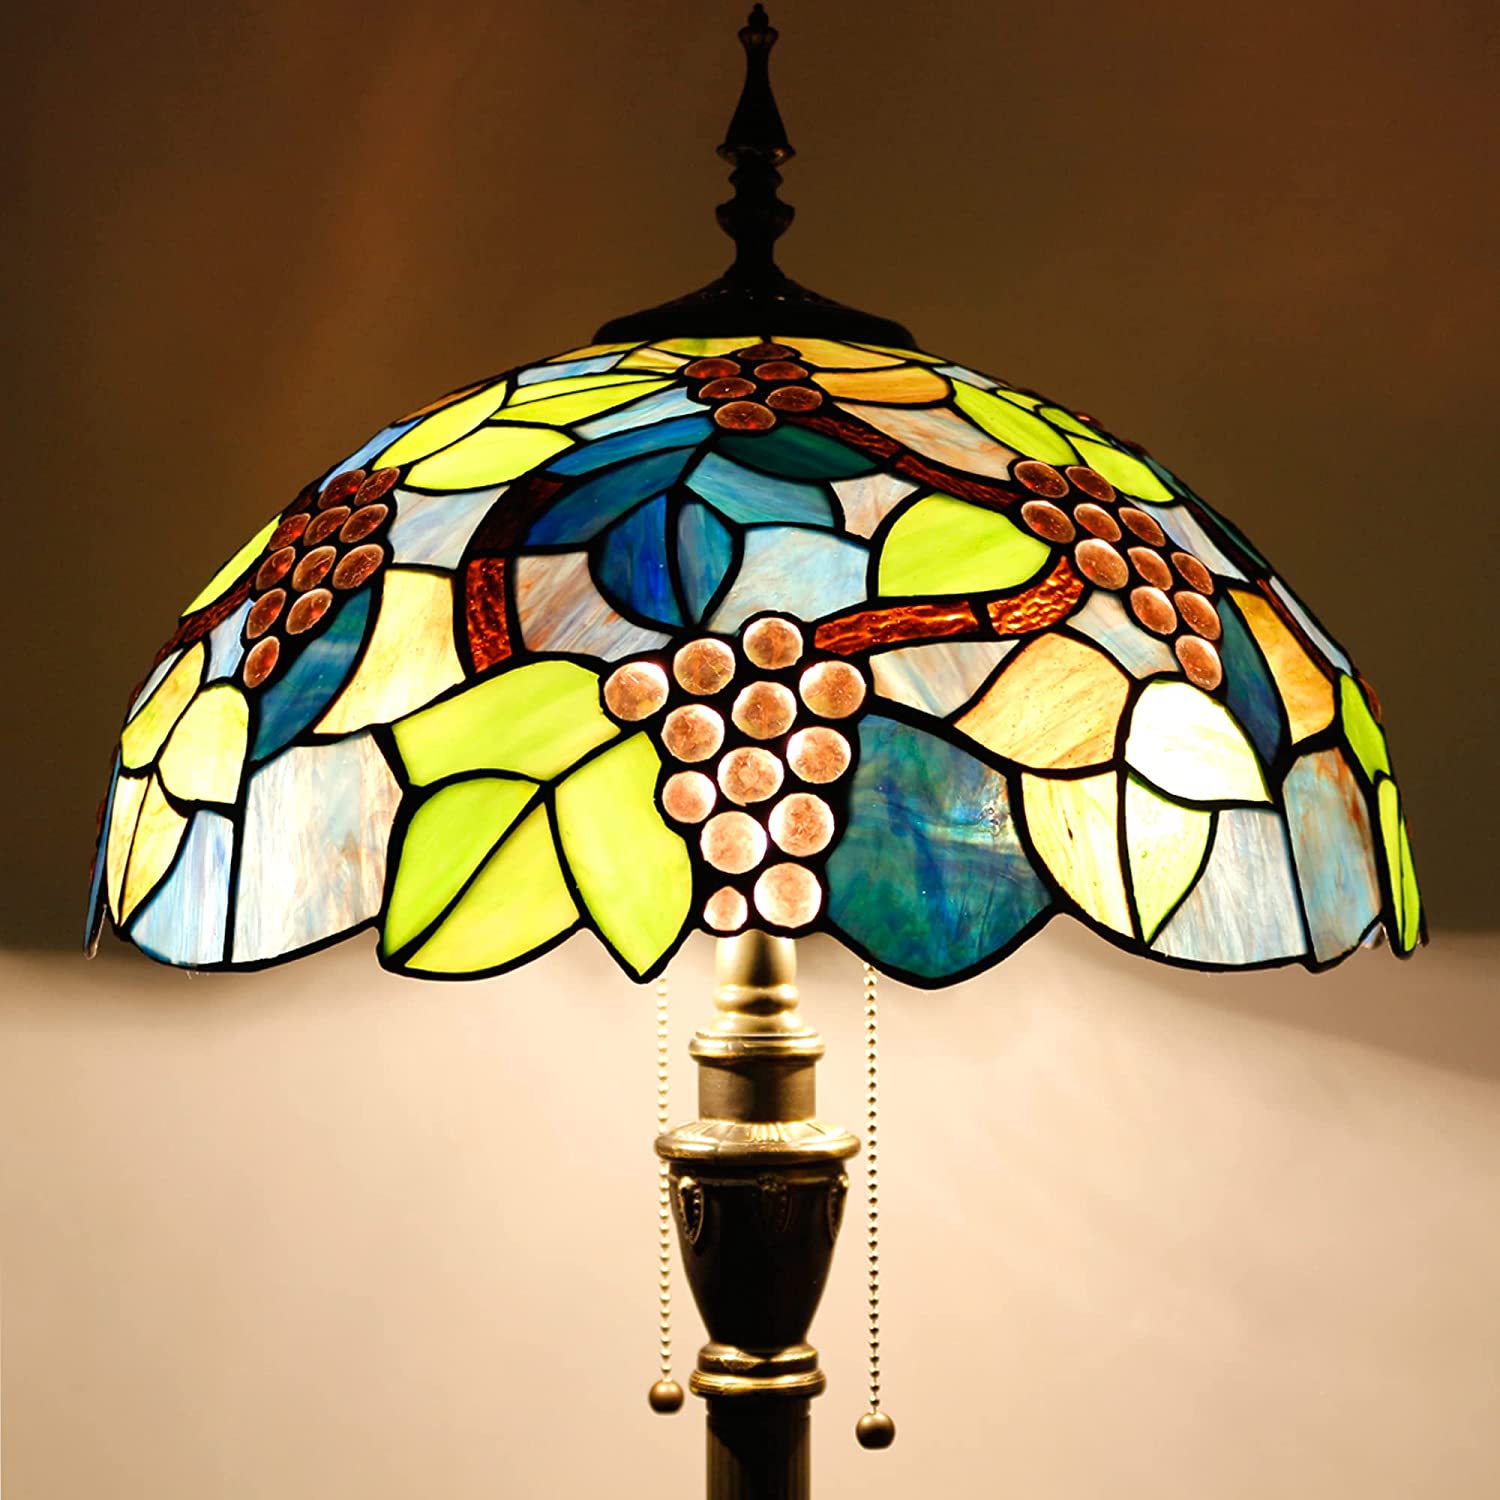 Werfactory® Tiffany Floor Lamp W16H70 Inch Stained Glass Grapes Style Reading Lamp